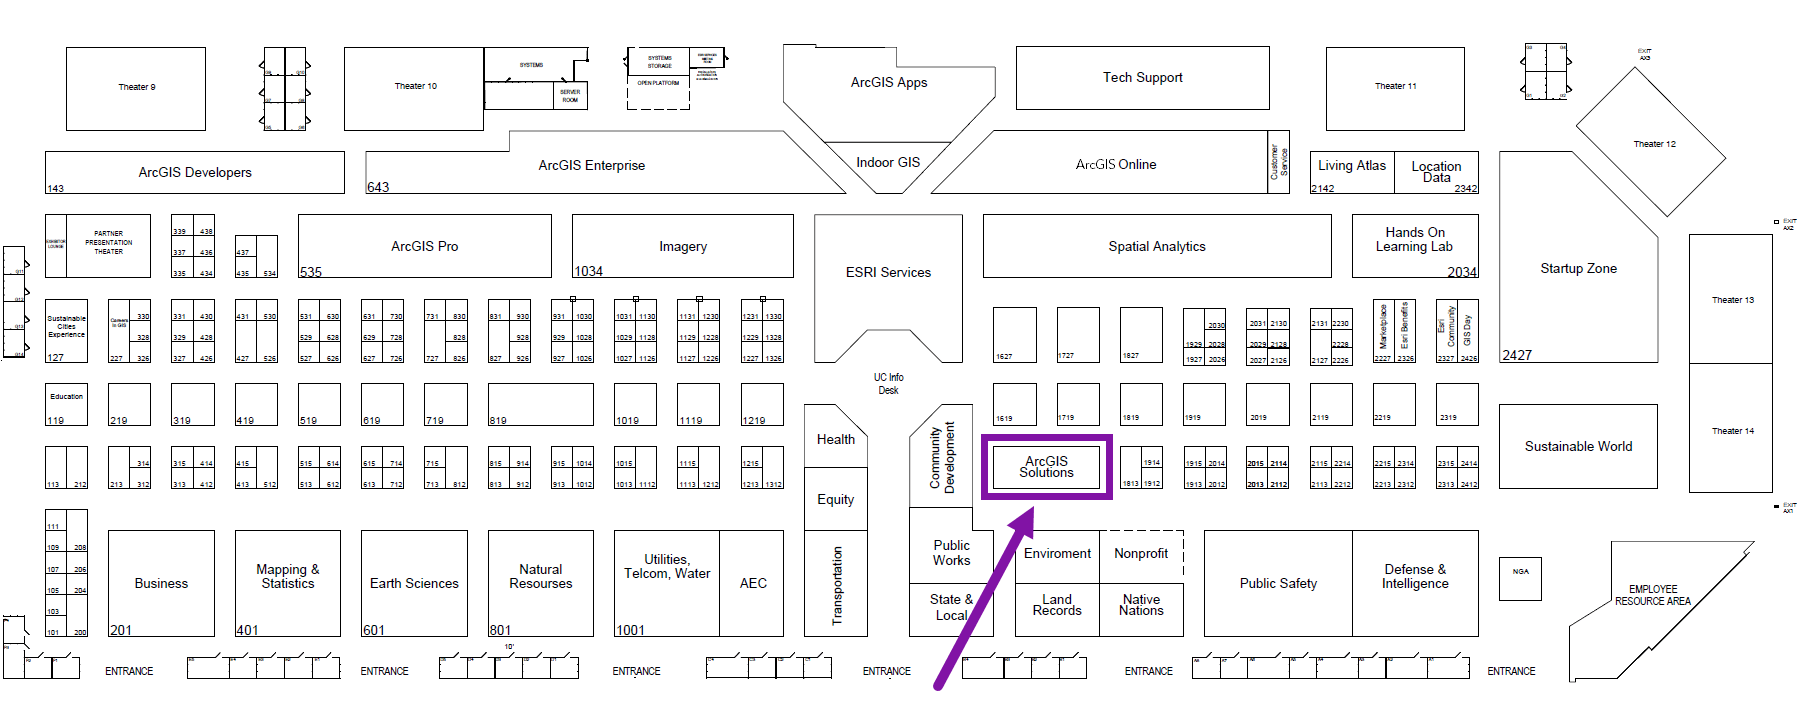 Map of Expo with the ArcGIS Solutions area outlined with a purple rectangle.